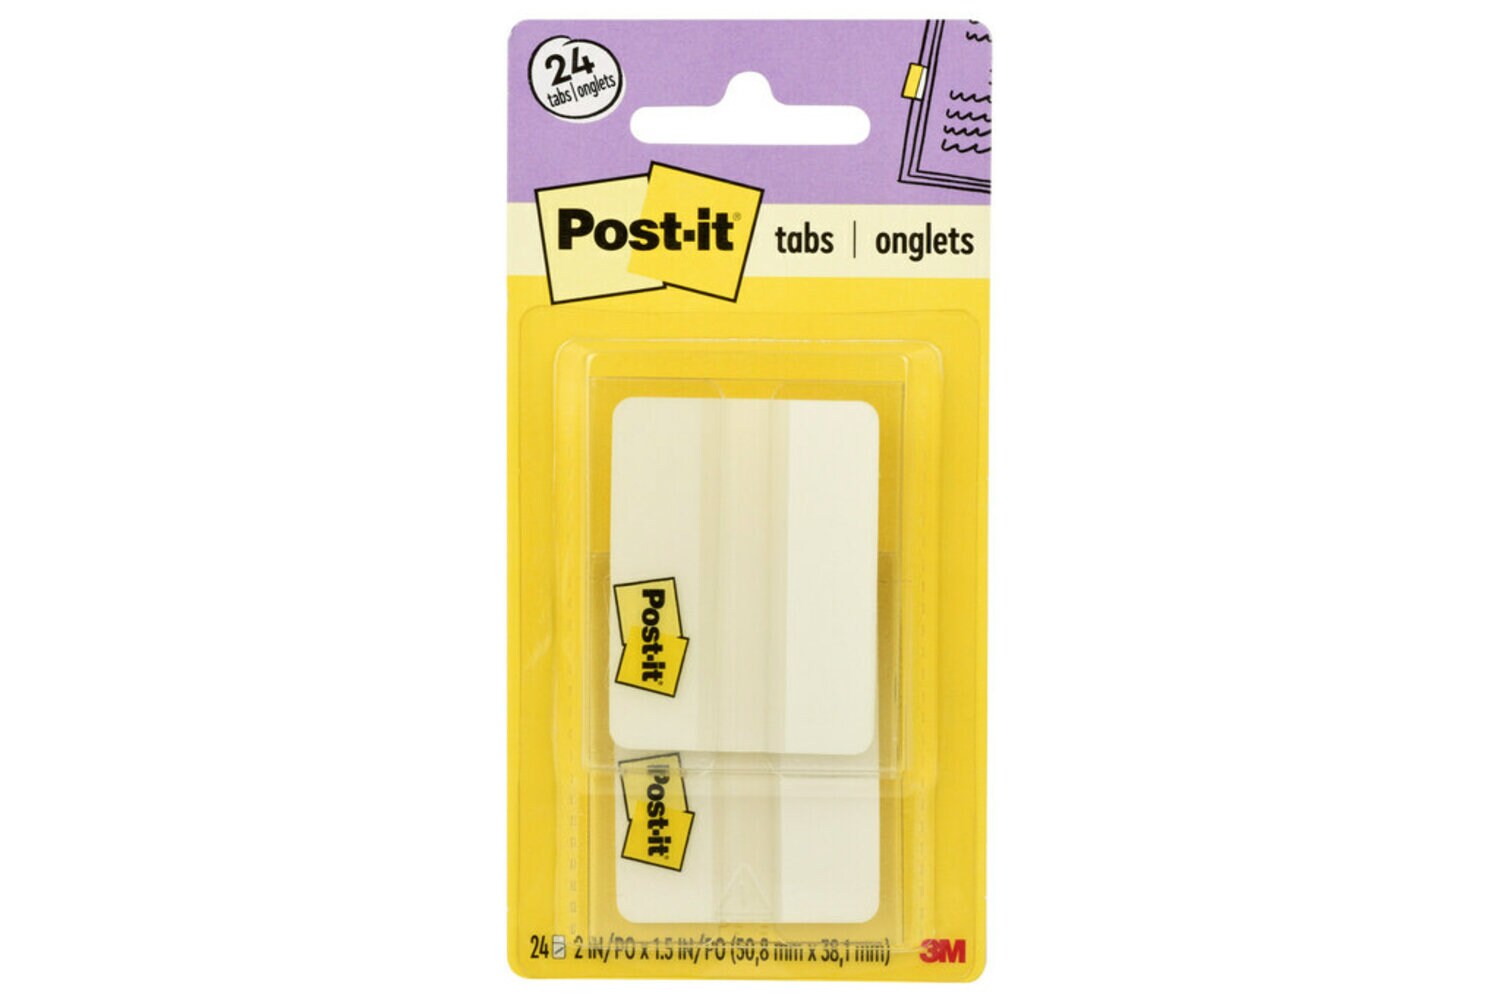 7010370973 - Post-it Durable Tabs 686-24WE, 2 in. x 1.5 in. (50,8 mm x 38 mm) White